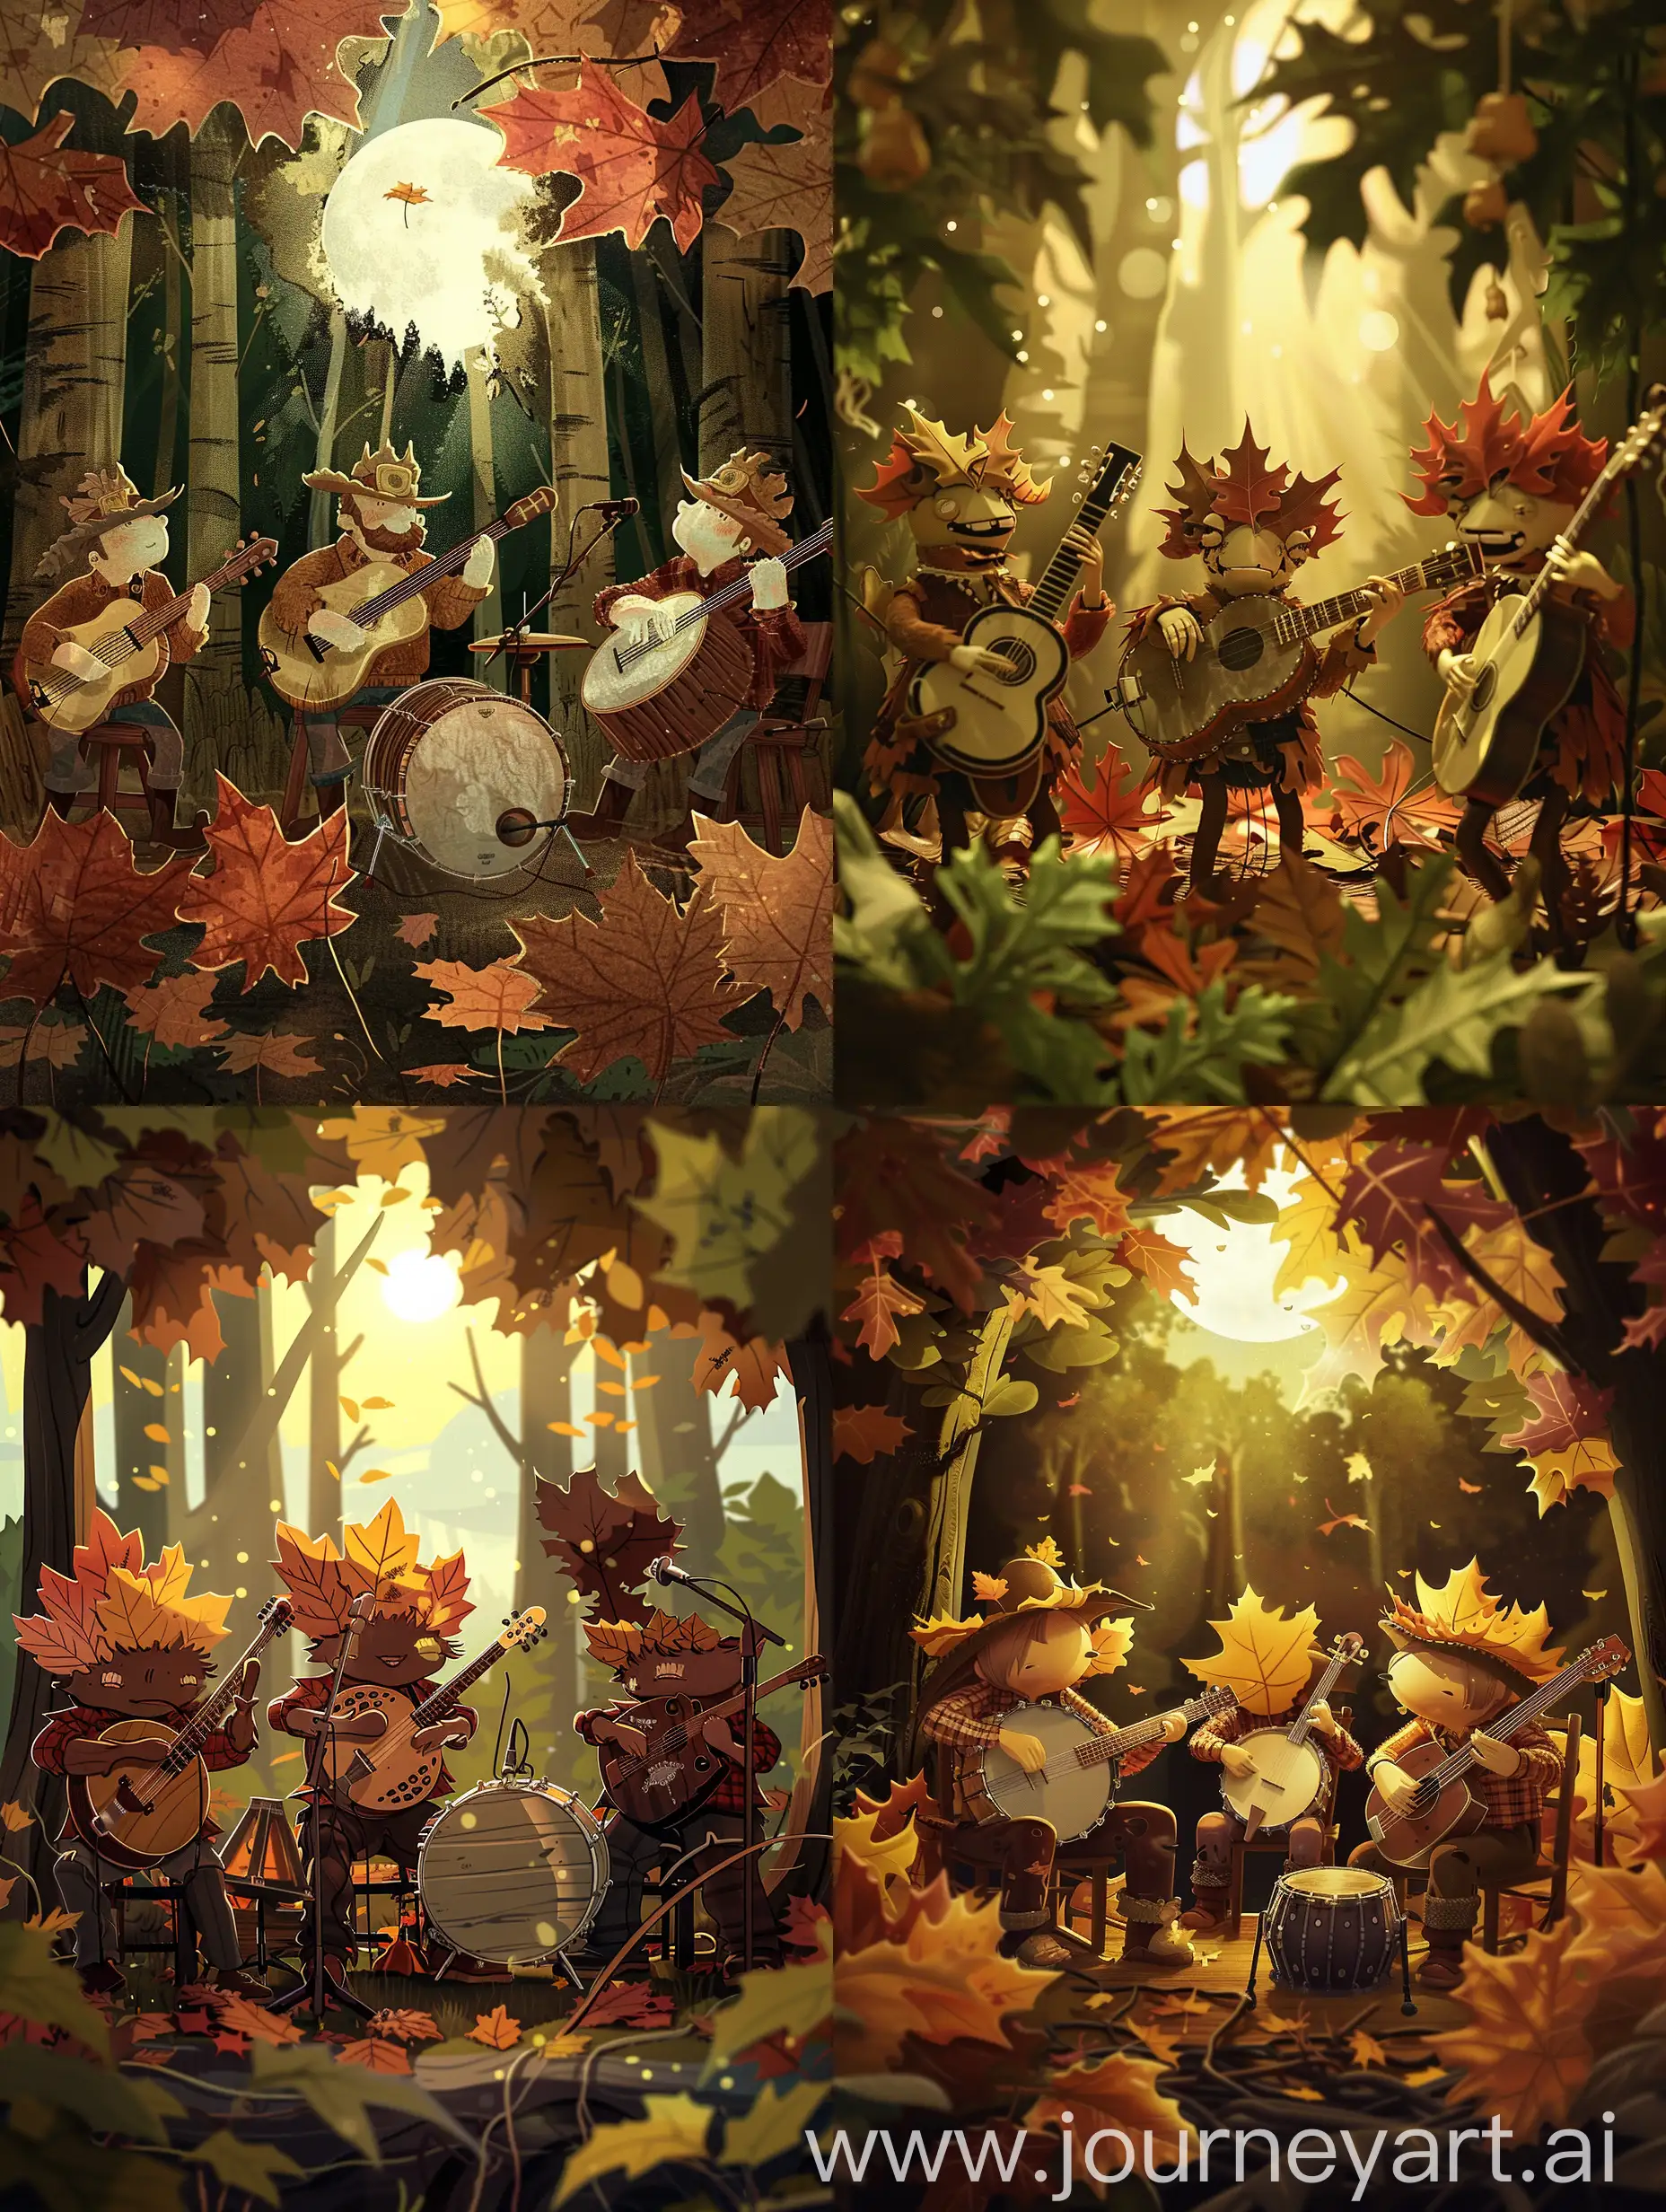 A 2D animation of a folk music band composed of anthropomorphic autumn leaves, each playing traditional bluegrass instruments, amidst a rustic forest setting dappled with the soft light of a harvest moon.